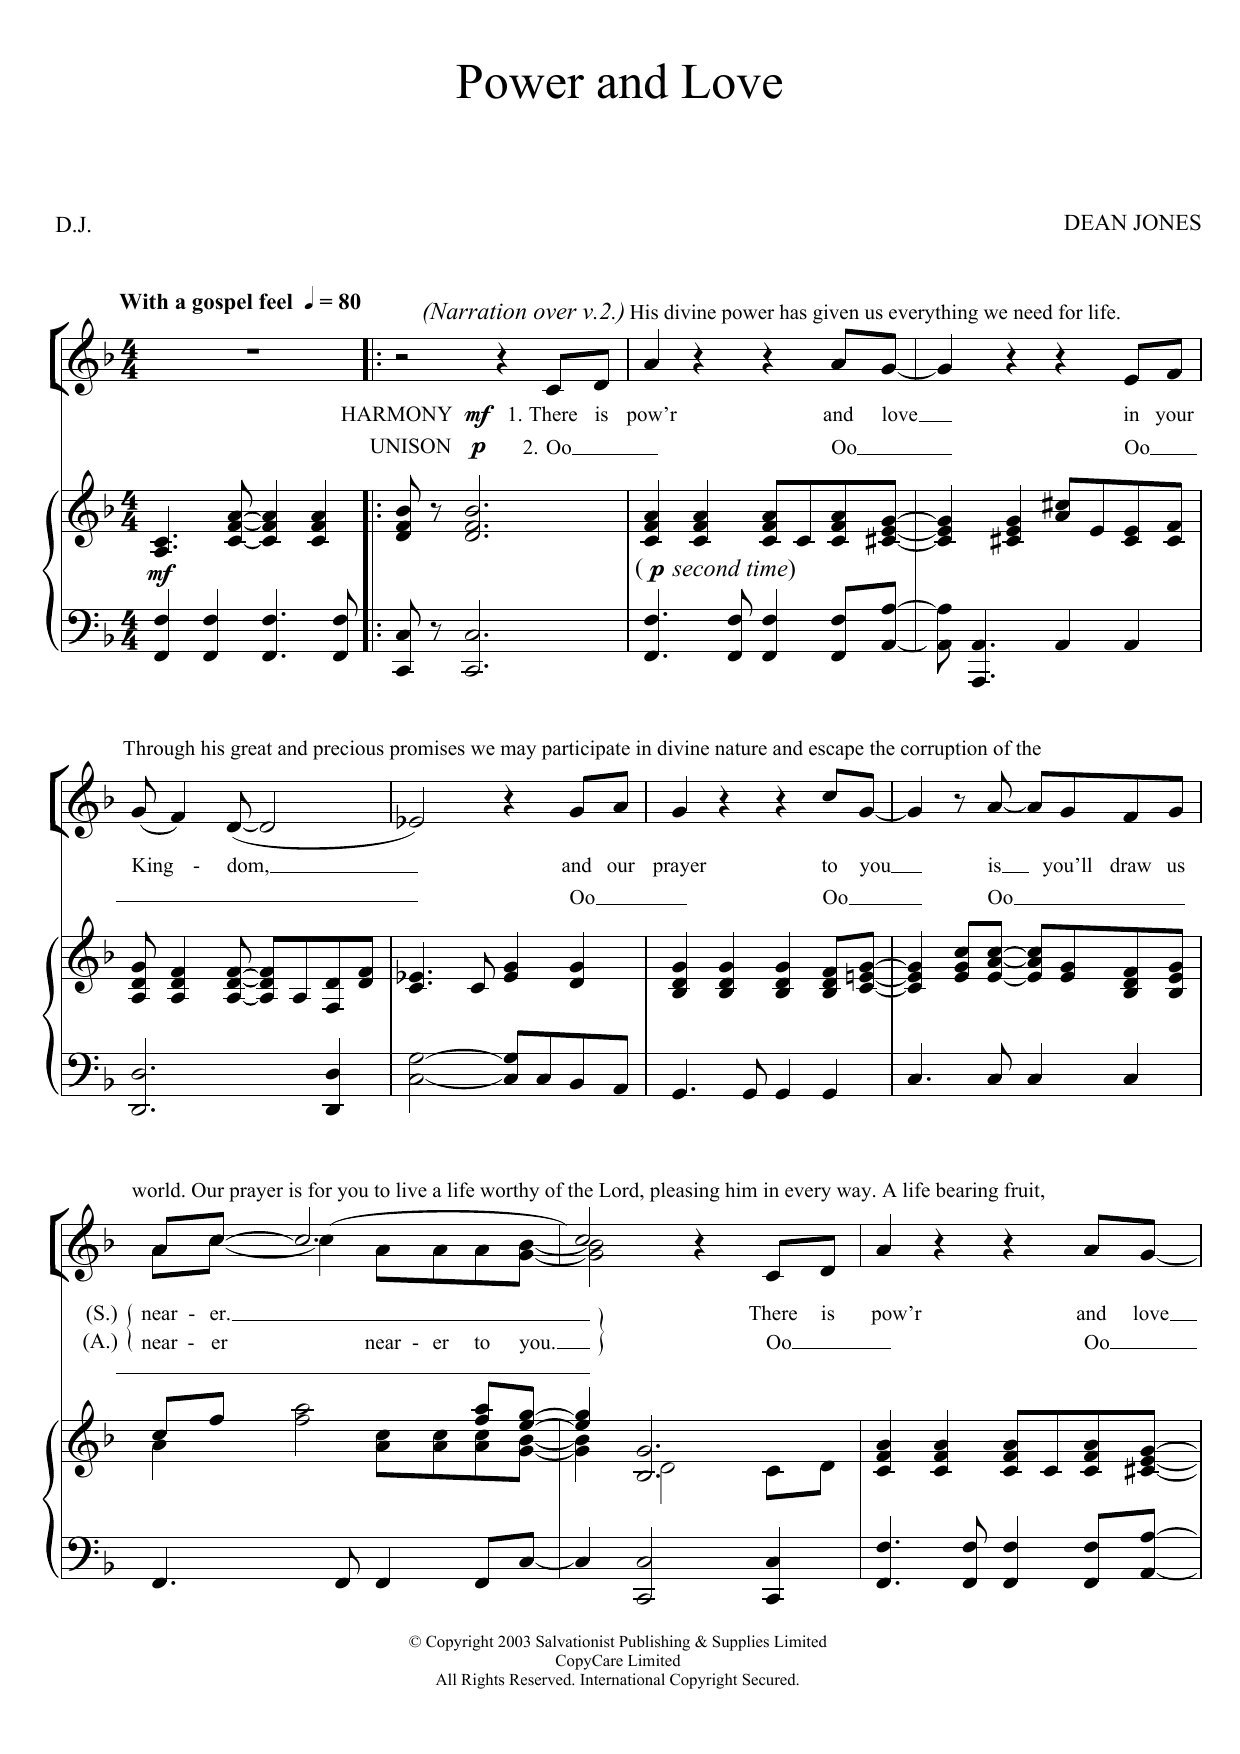 Download The Salvation Army Power And Love Sheet Music